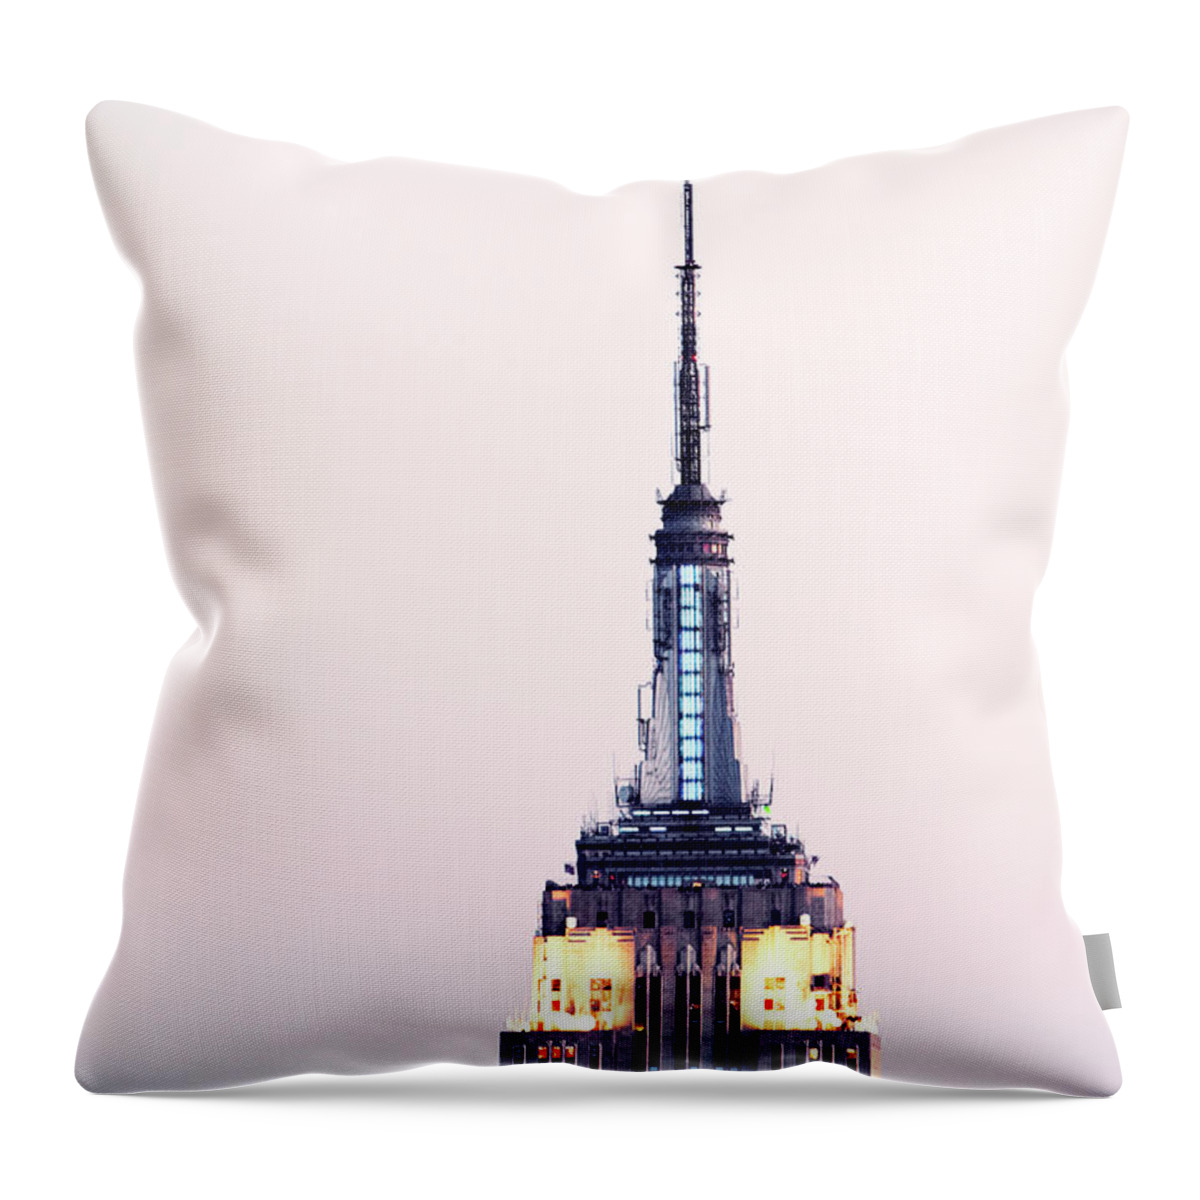 Built Structure Throw Pillow featuring the photograph Empire State #1 by Allan Baxter